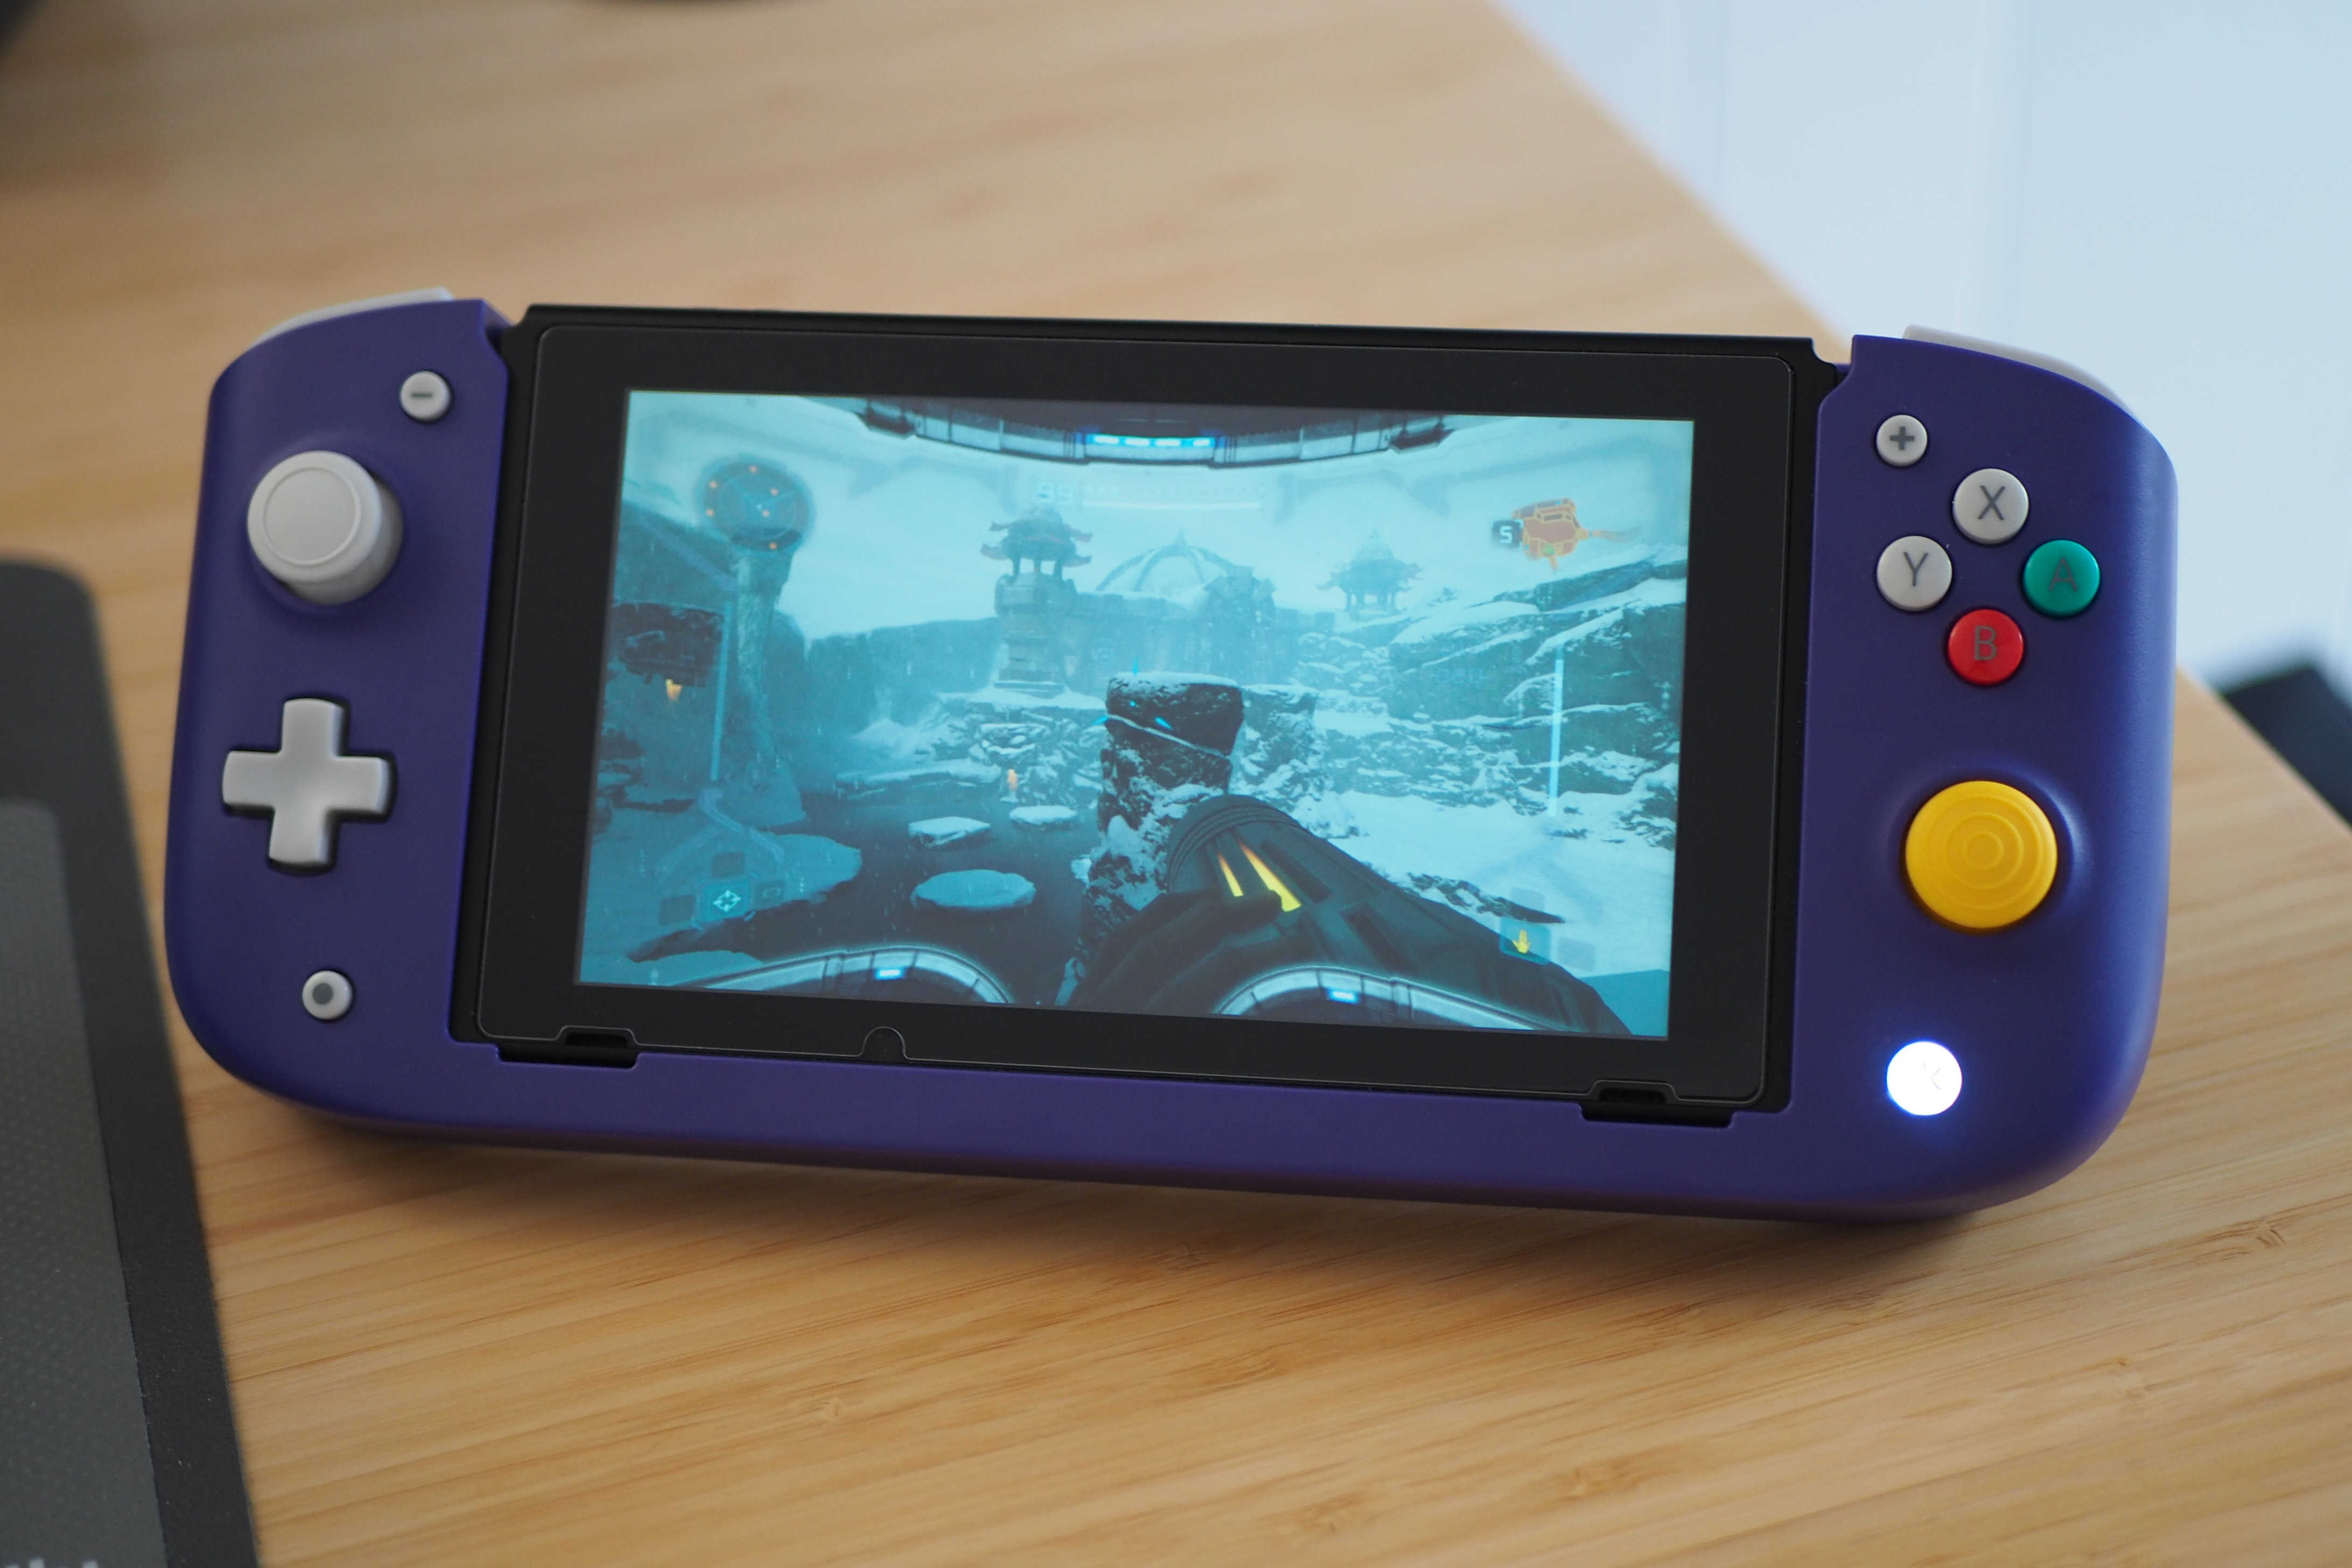 An image of the CRKD Nitro Deck in the GameCube color scheme. The Nintendo Switch accessory is holding a Switch, which is displaying Metroid Prime: Remastered on its screen.